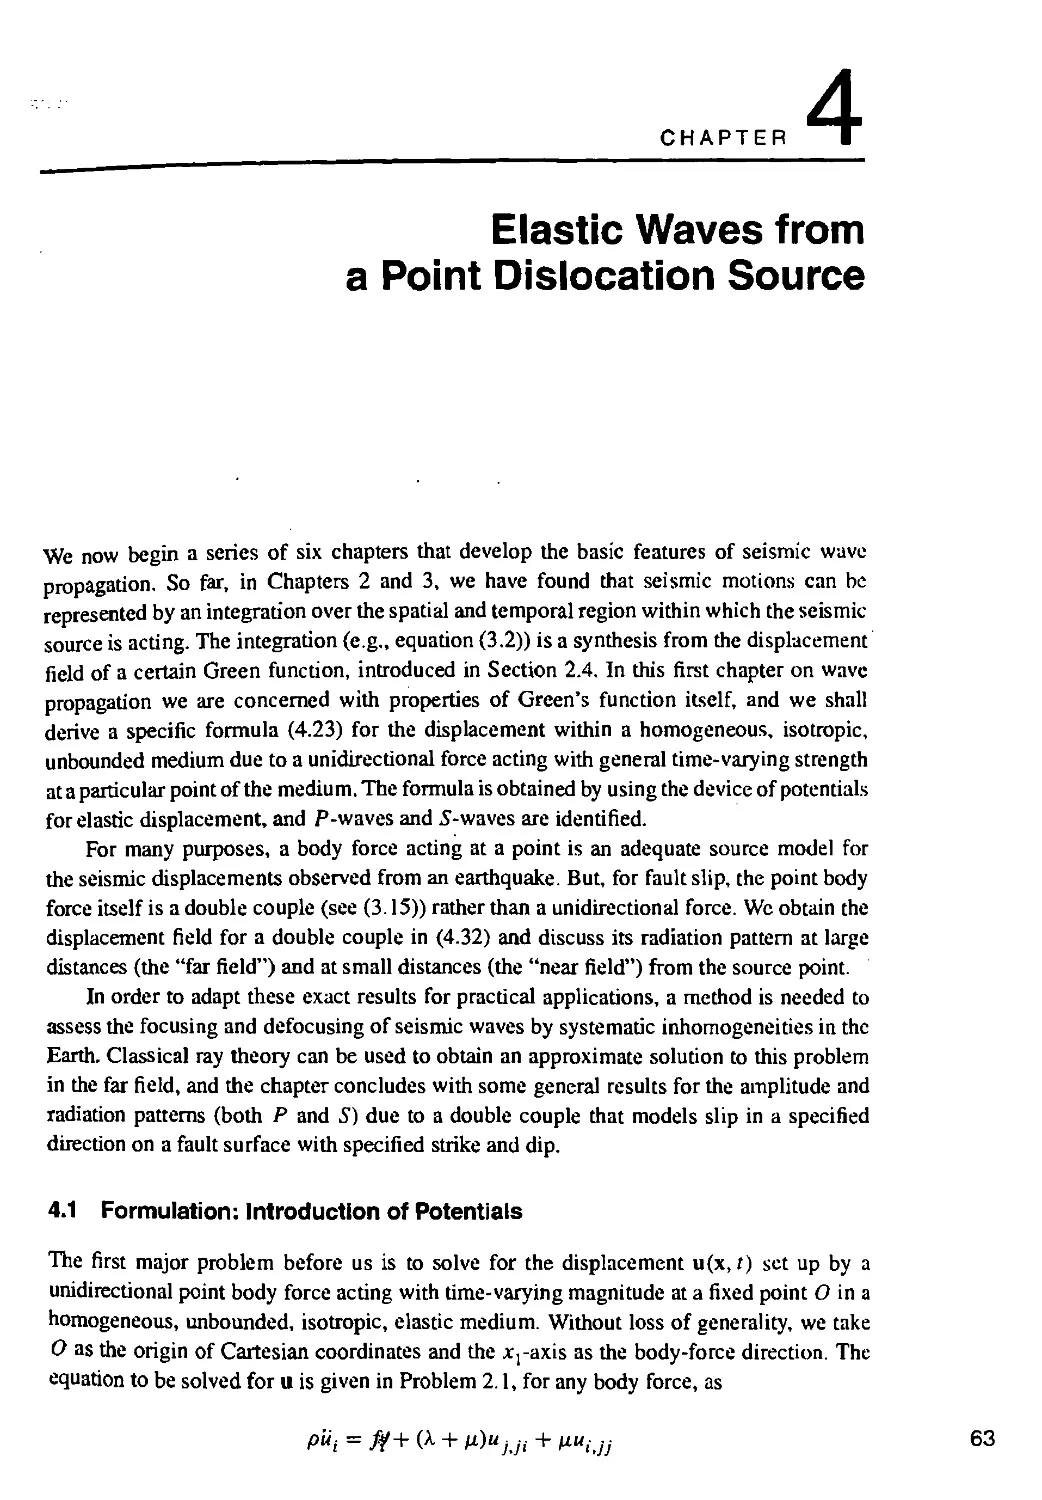 4. ELASTIC WAVES FROM A POINT DISLOCATION SOURCE